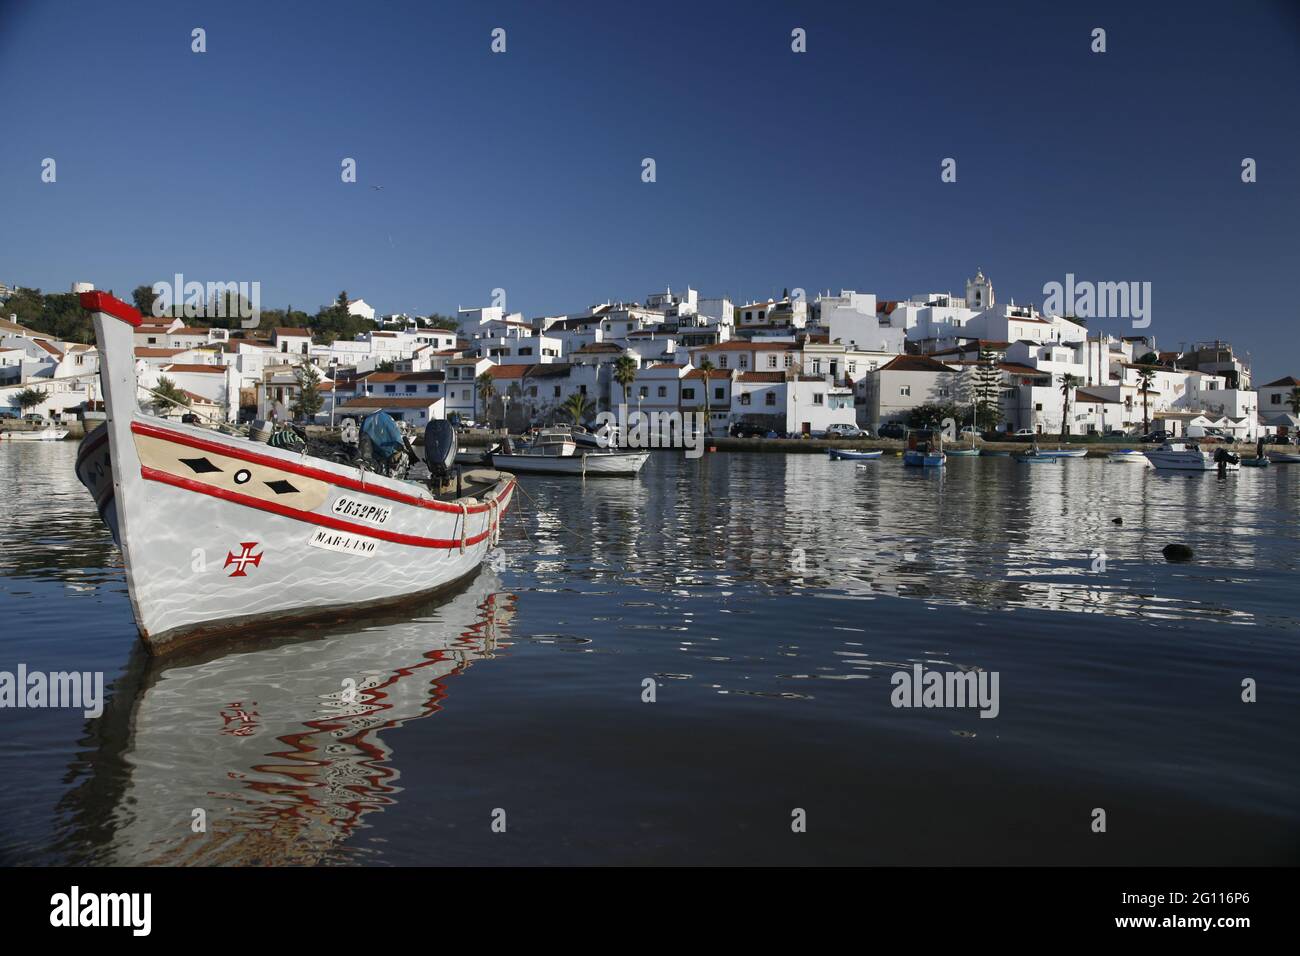 A general view of Ferragudo, a charming fishing town situated on the eastern side of the Arada River on the western border of the municipality of Lagoa, in Portugal and which is often claimed to be the prettiest village in the Algarve. Picture date: Monday August 4, 2008. Stock Photo